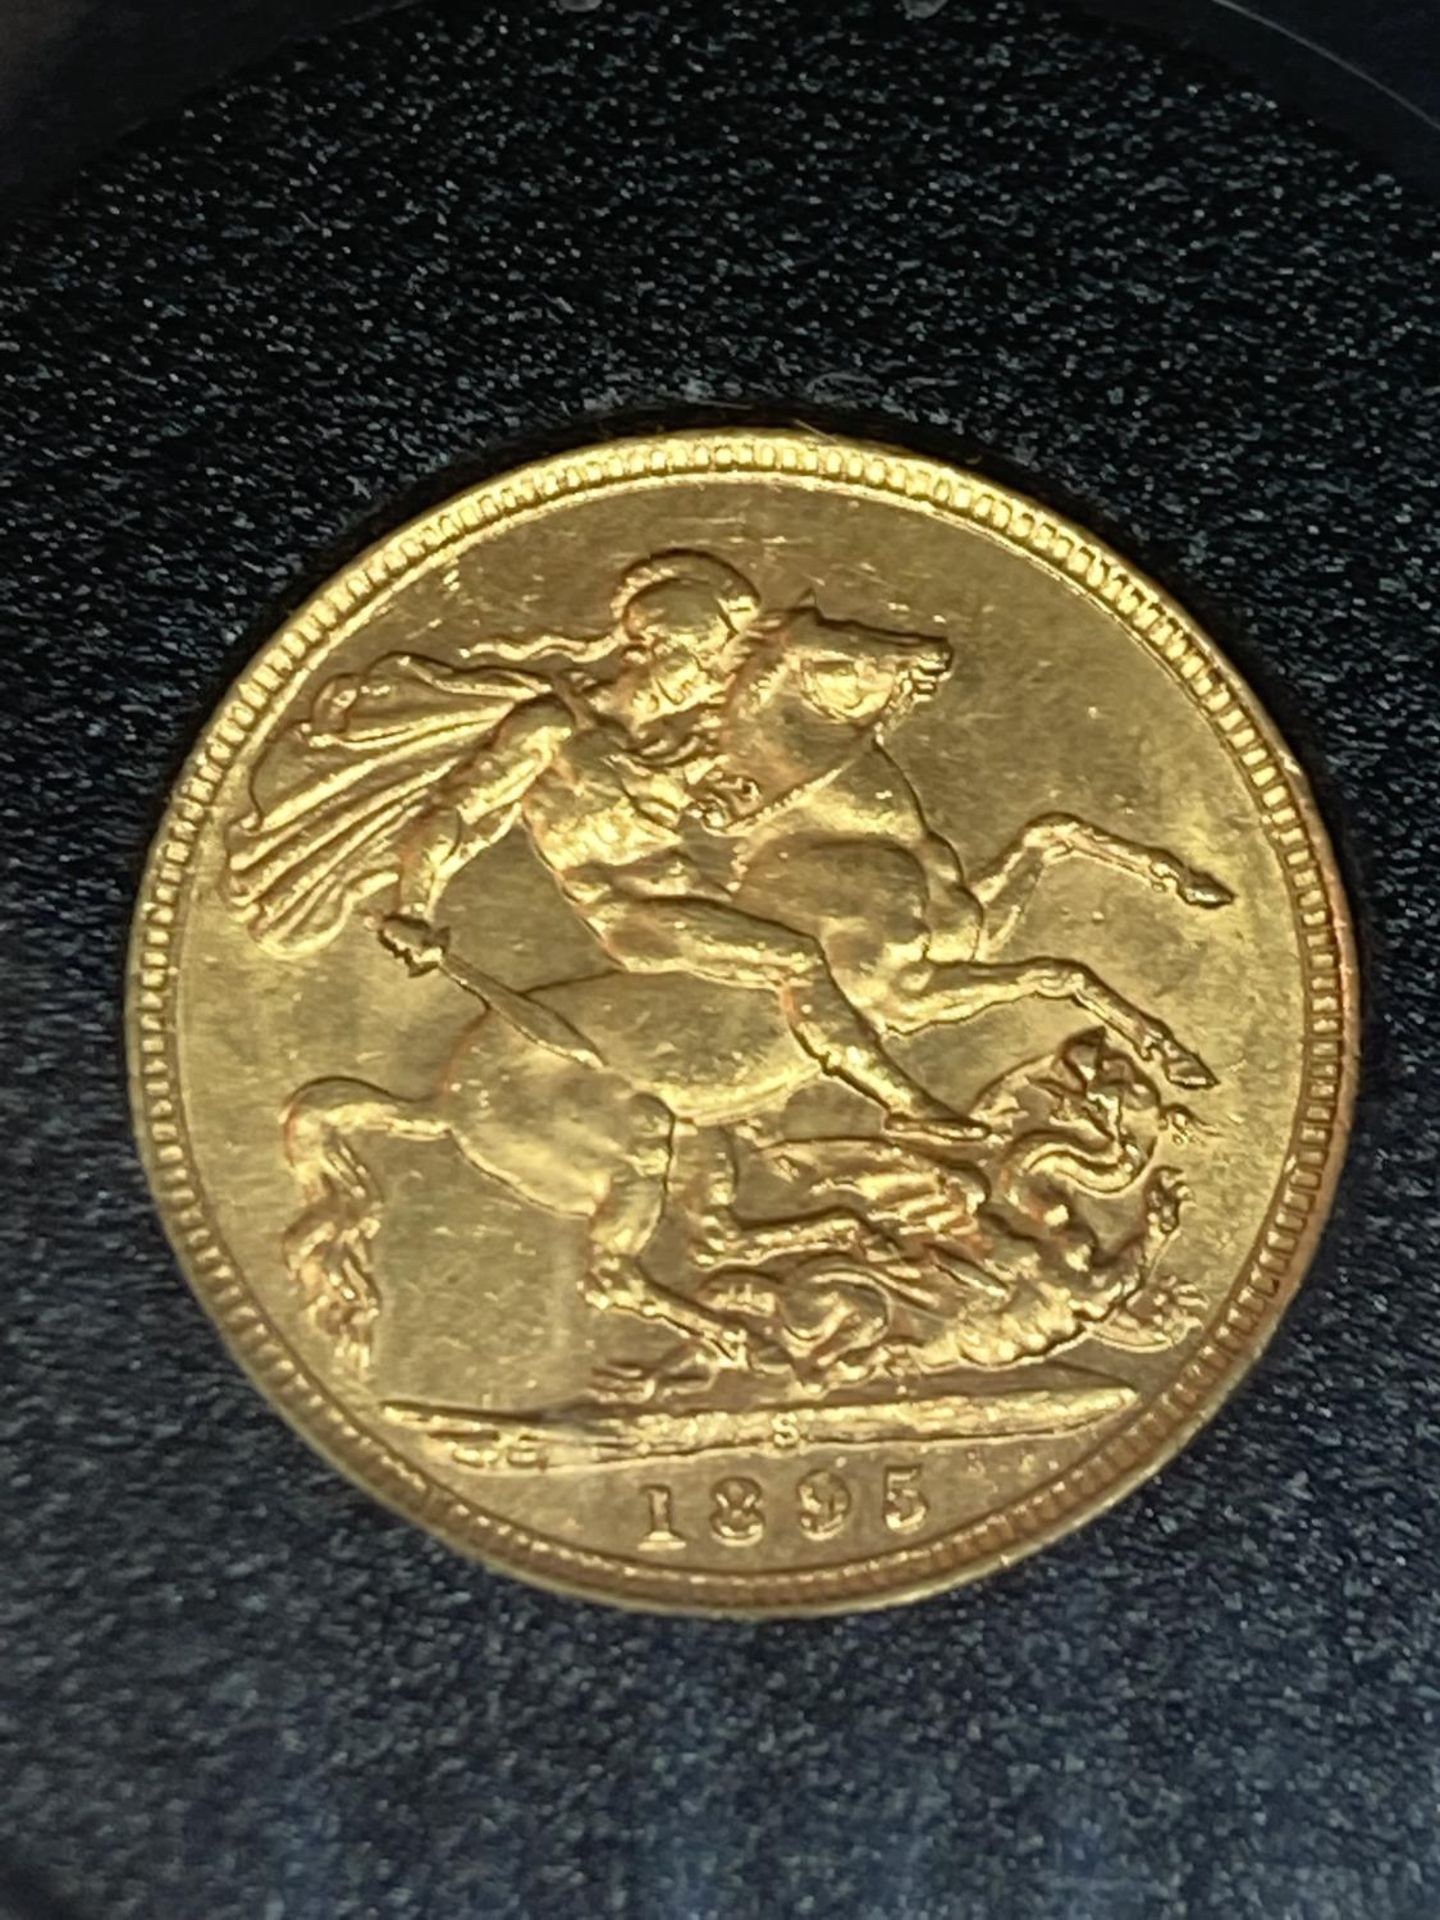 AN 1895 QUEEN VICTORIA VEILED HEAD GOLD SOVEREIGN - Image 2 of 3